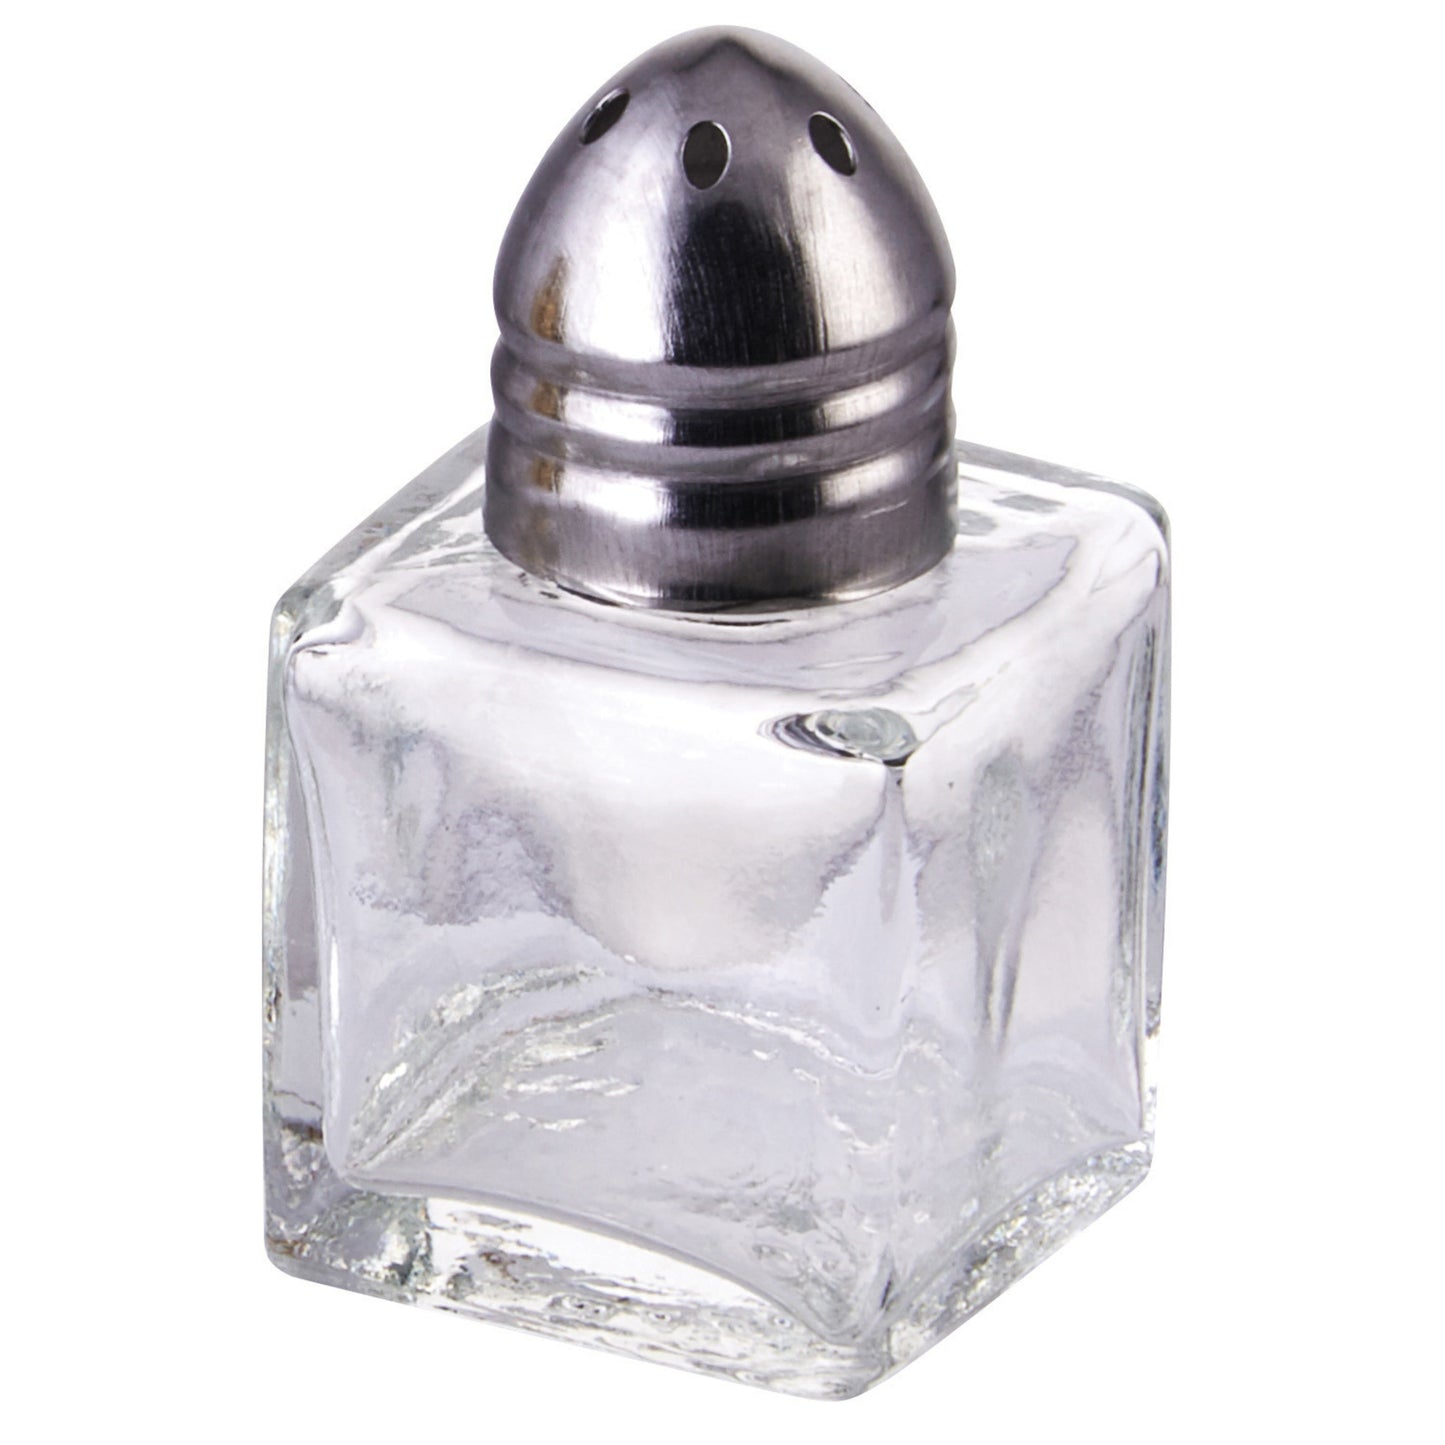 G-100 - Square Shaker, 1/2 oz - Stainless